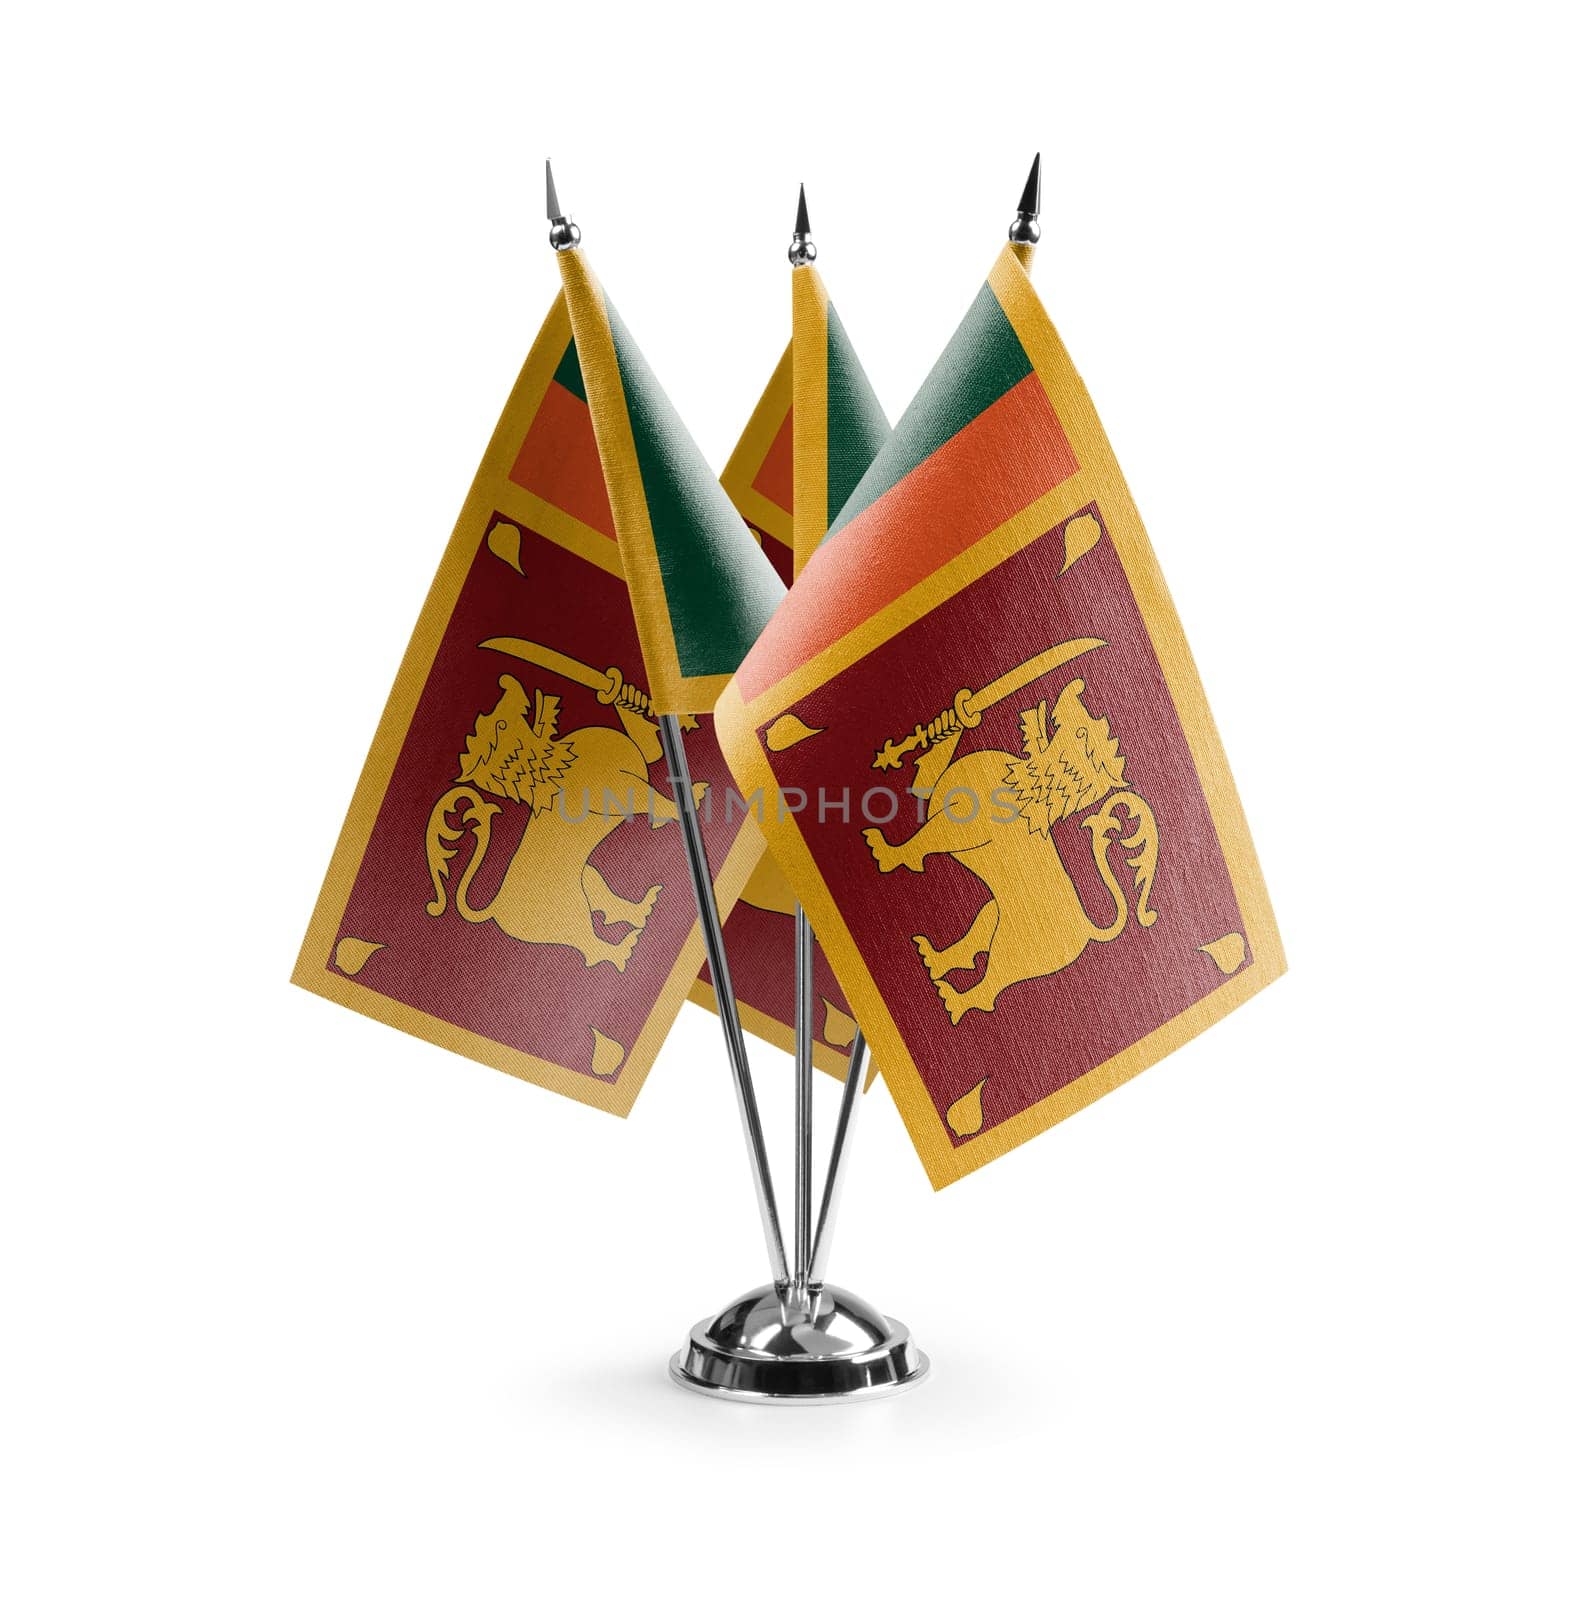 Small national flags of the Sri Lanka on a white background by butenkow